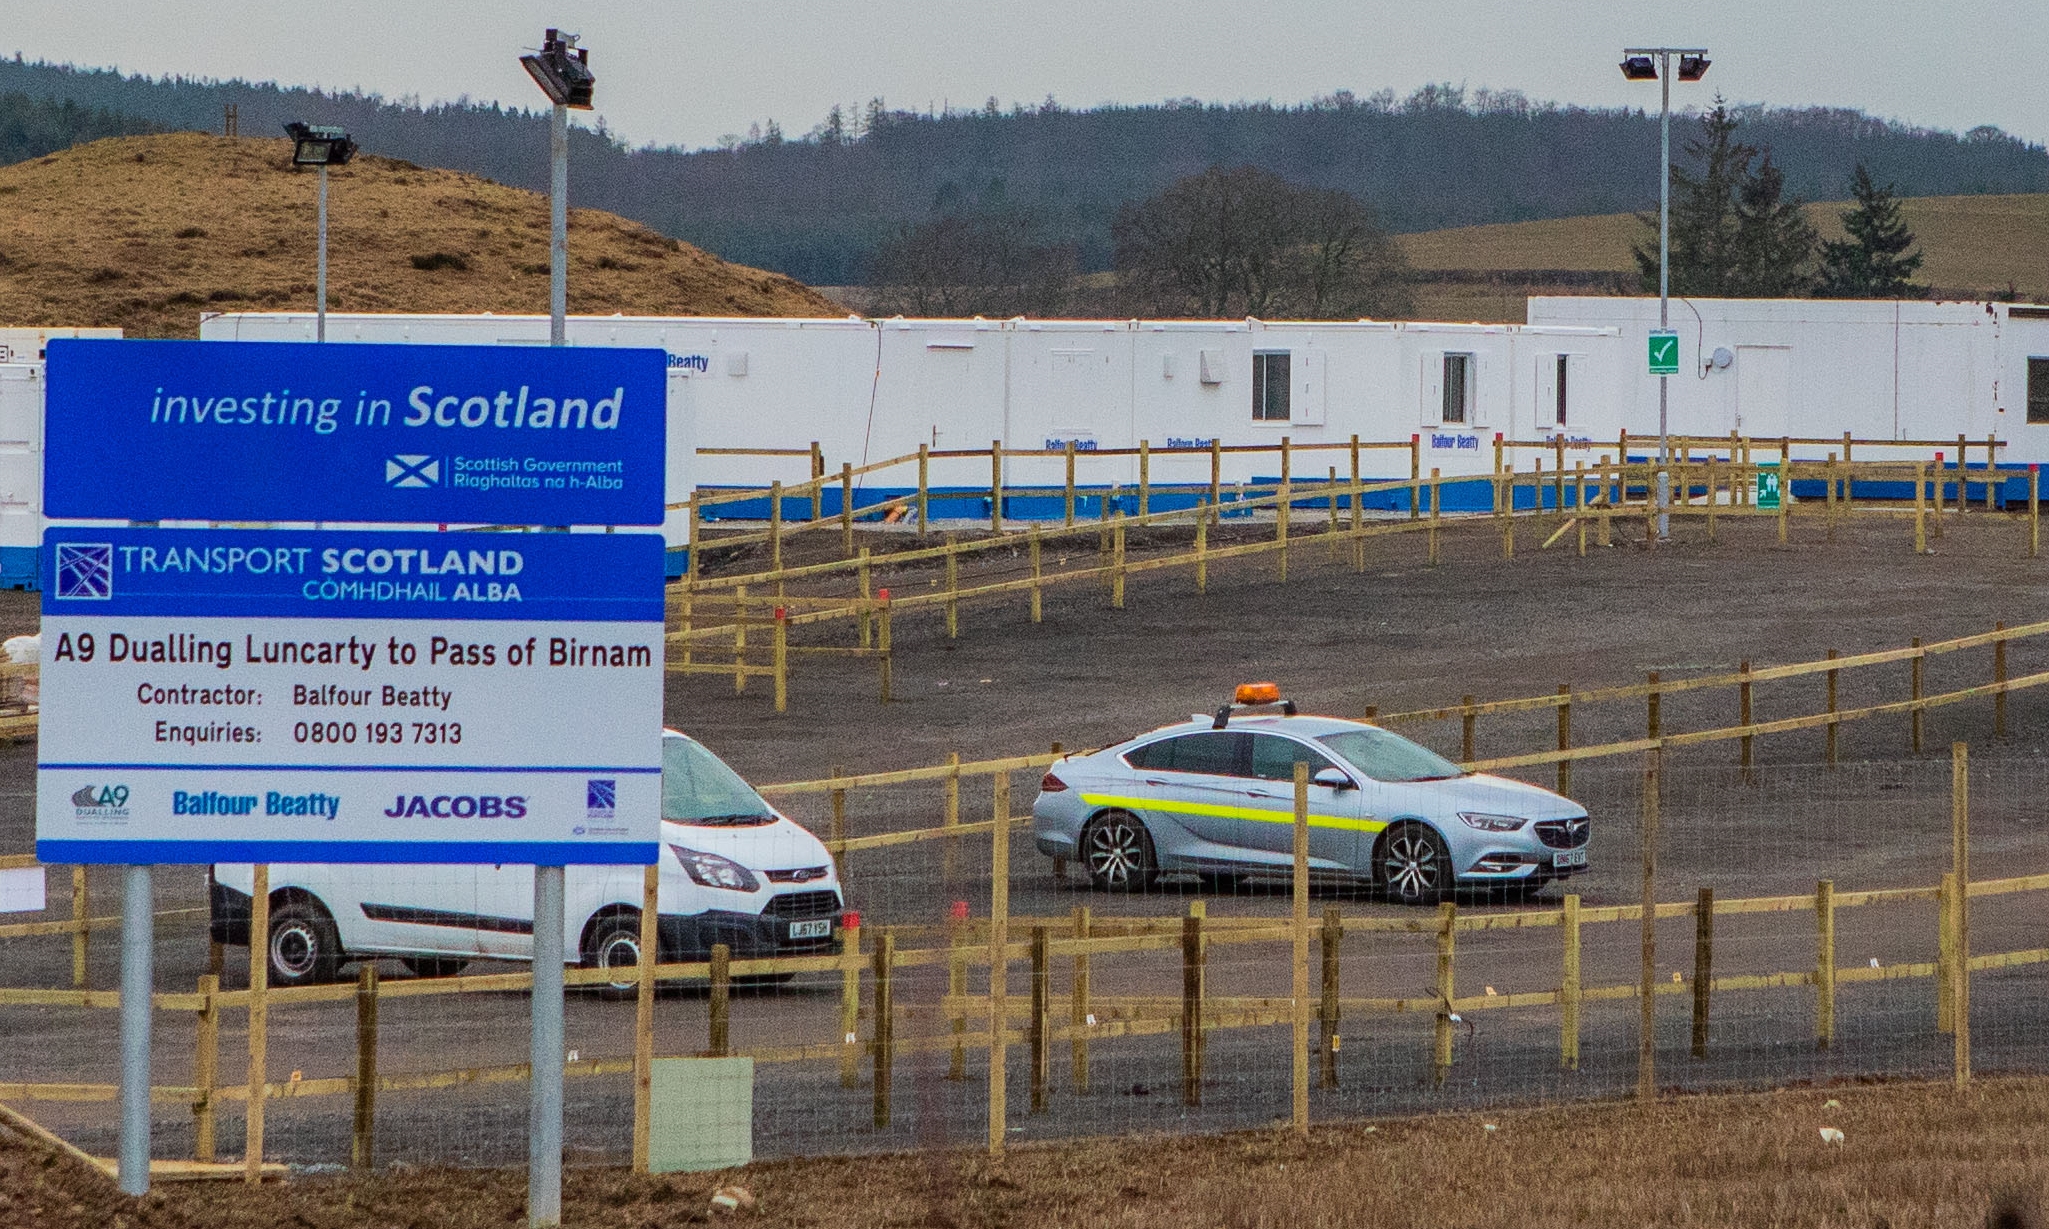 The accident occurred at contractor Balfour Beatty’s compound off the A9, north of Perth.